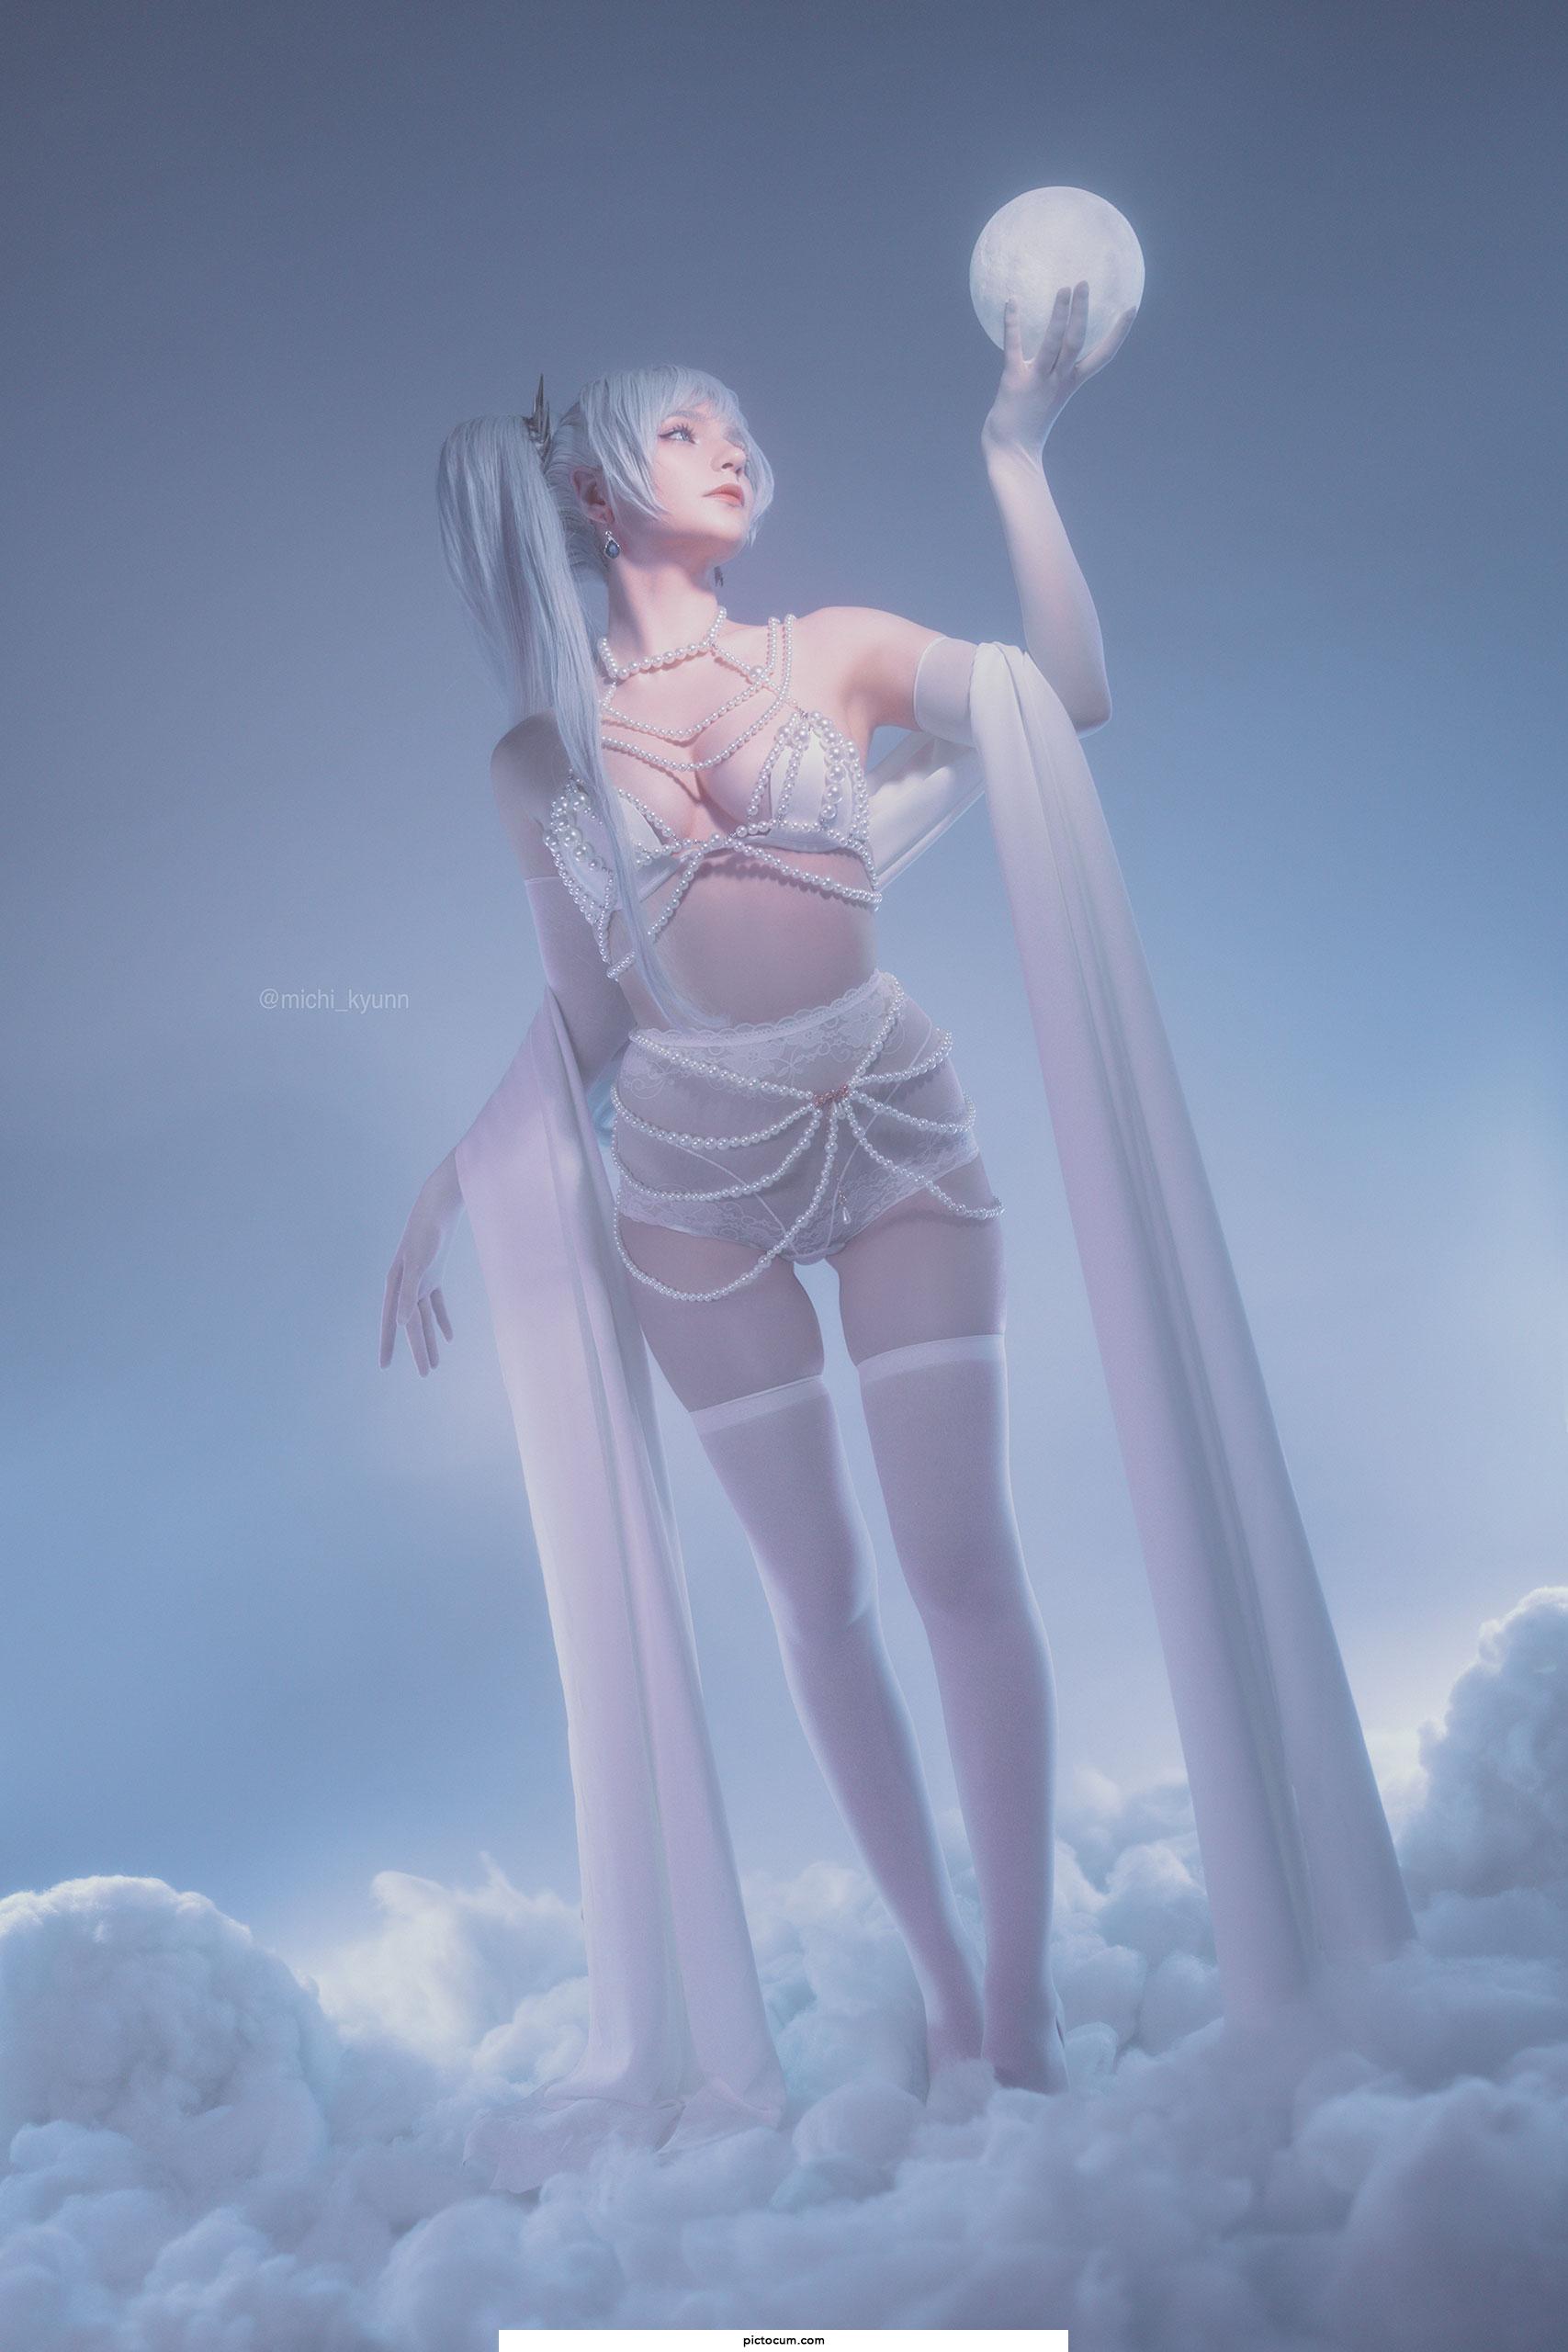 Weiss schnee from rwby by michi_kyunn